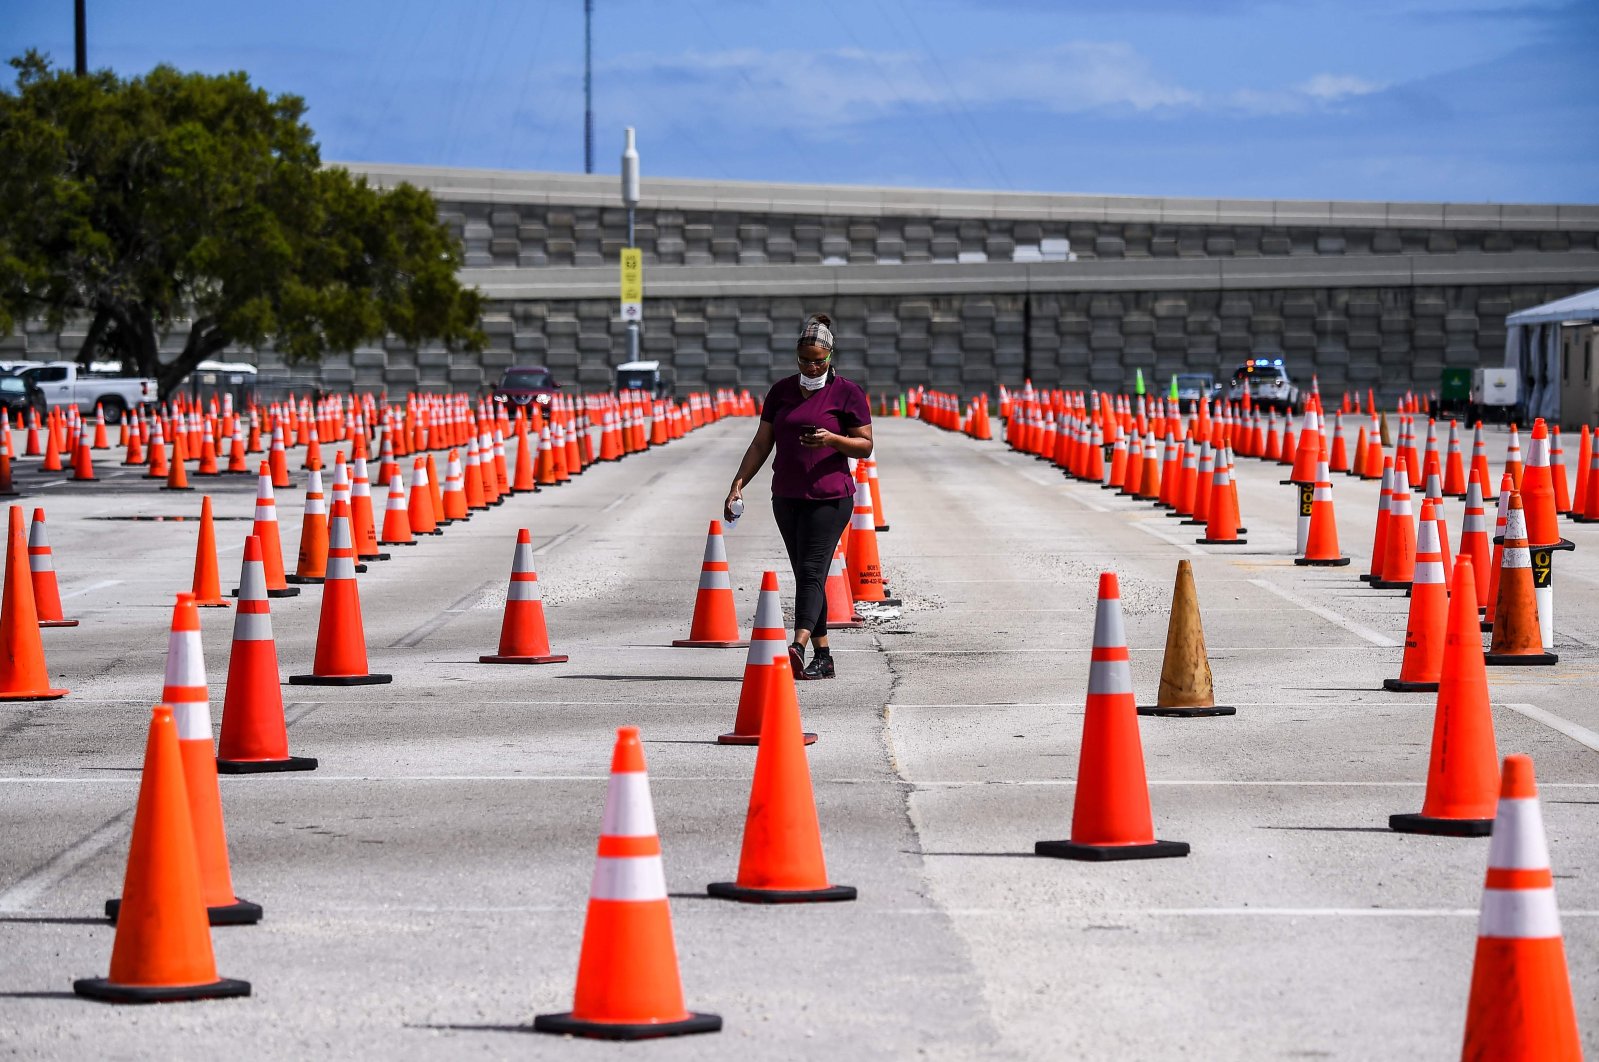 A health care worker walks at a COVID-19 vaccination drive-thru site at Hard Rock Stadium in Miami, Florida, on Feb. 22, 2021. (Photo by CHANDAN KHANNA / AFP)